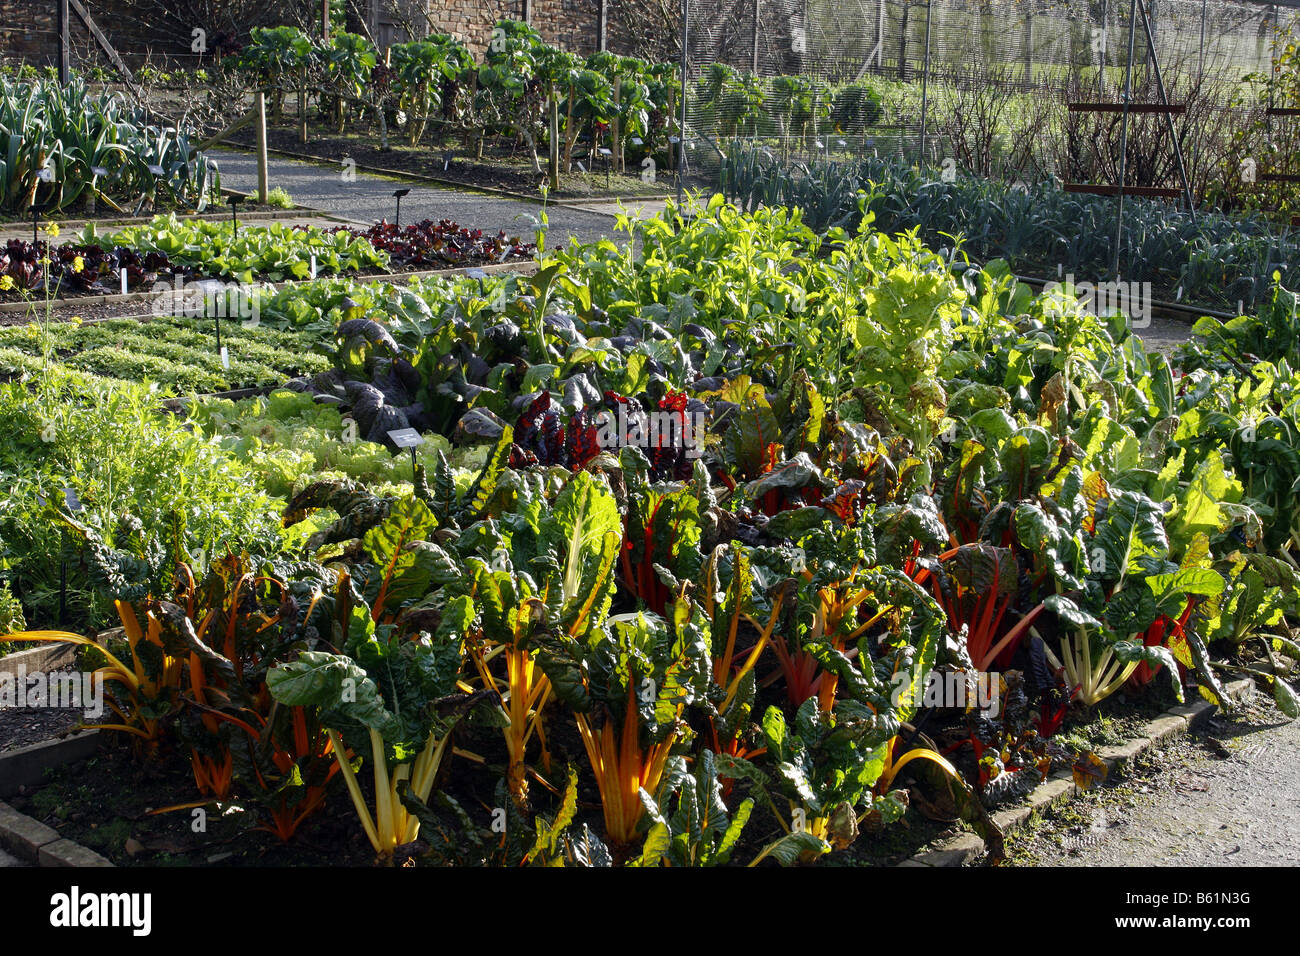 VEGETABLE BEDS AT RHS ROSEMOOR GARDEN DEVON PHOTOGRAPHED WITH RHS PERMIT Stock Photo